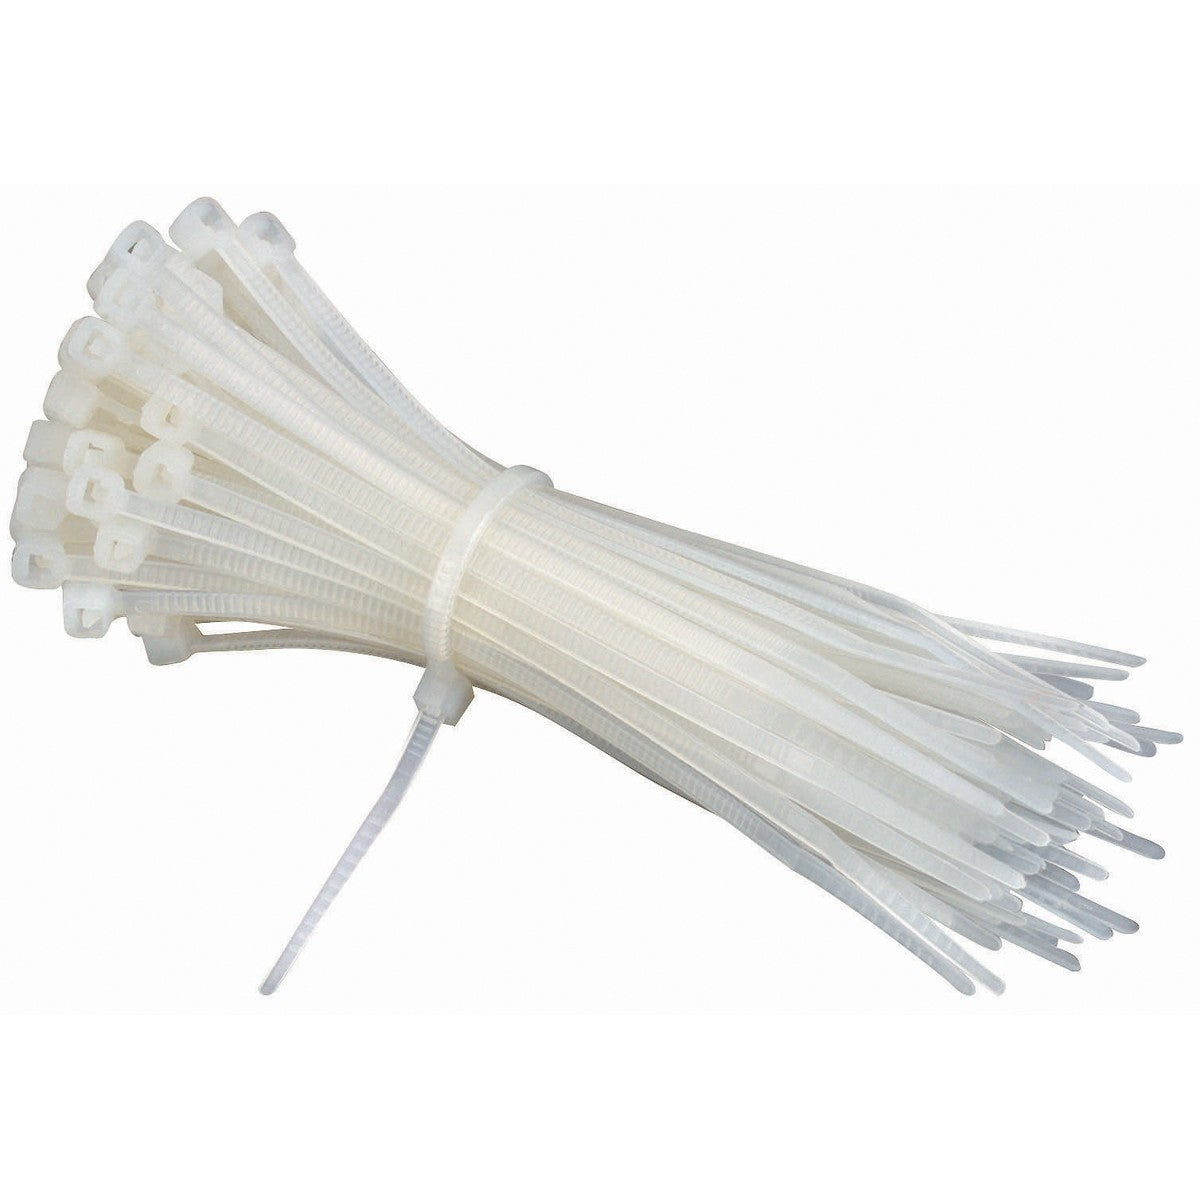 4.6 x 300mm - The Cable Tie Factory